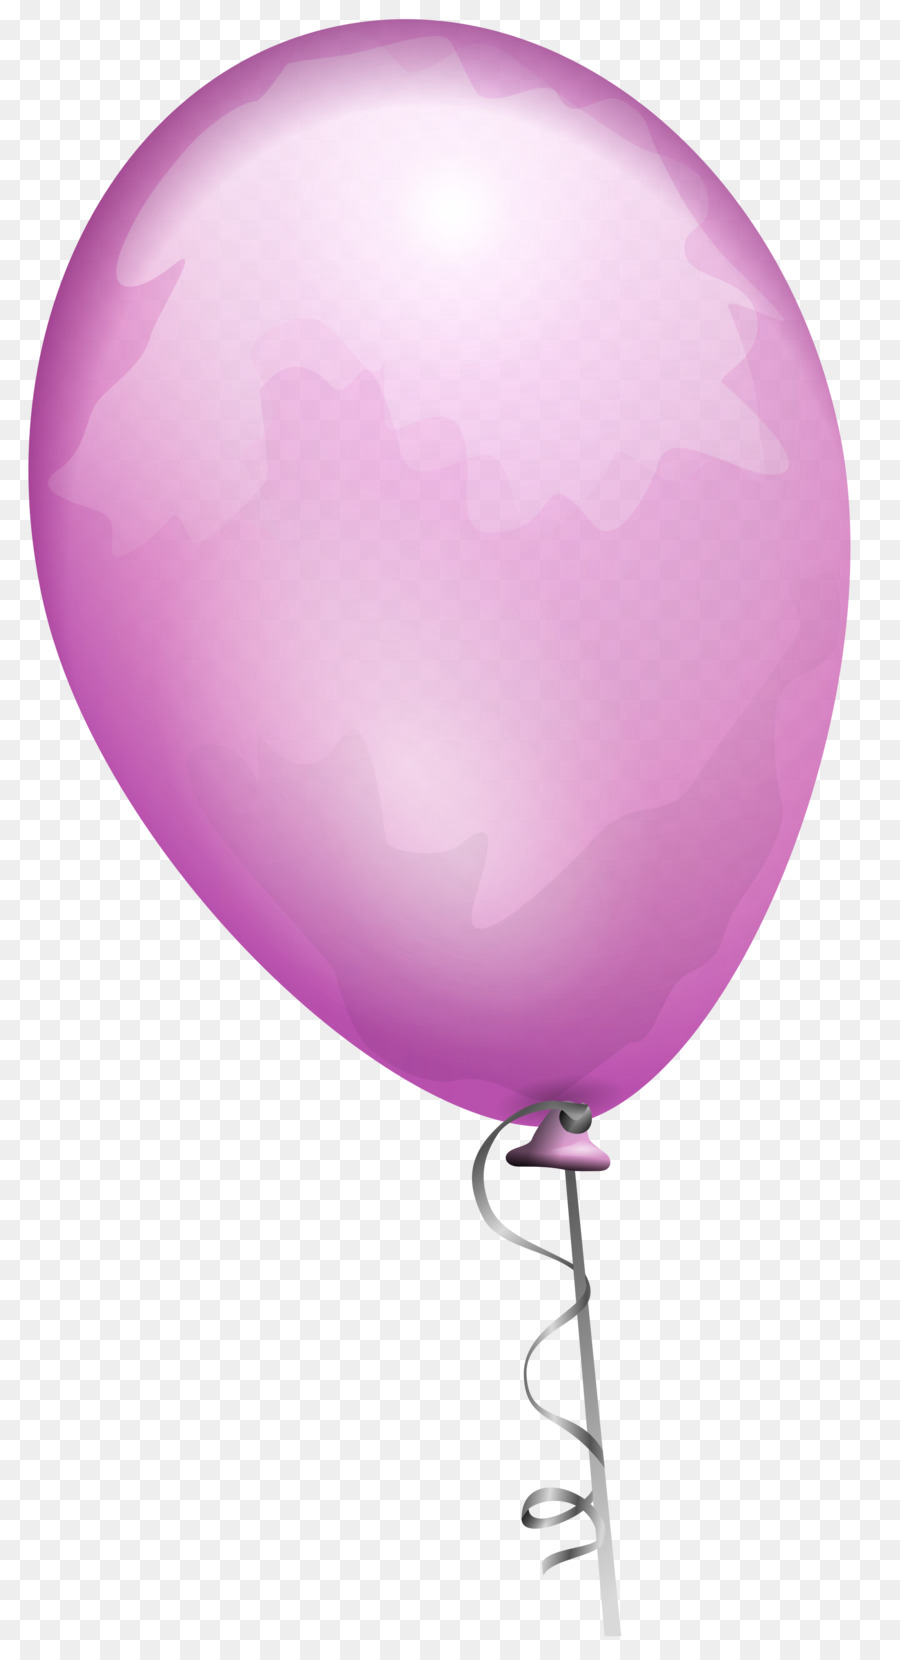 Speech balloon Clip art - Purple Toy Cliparts png download - 2000 